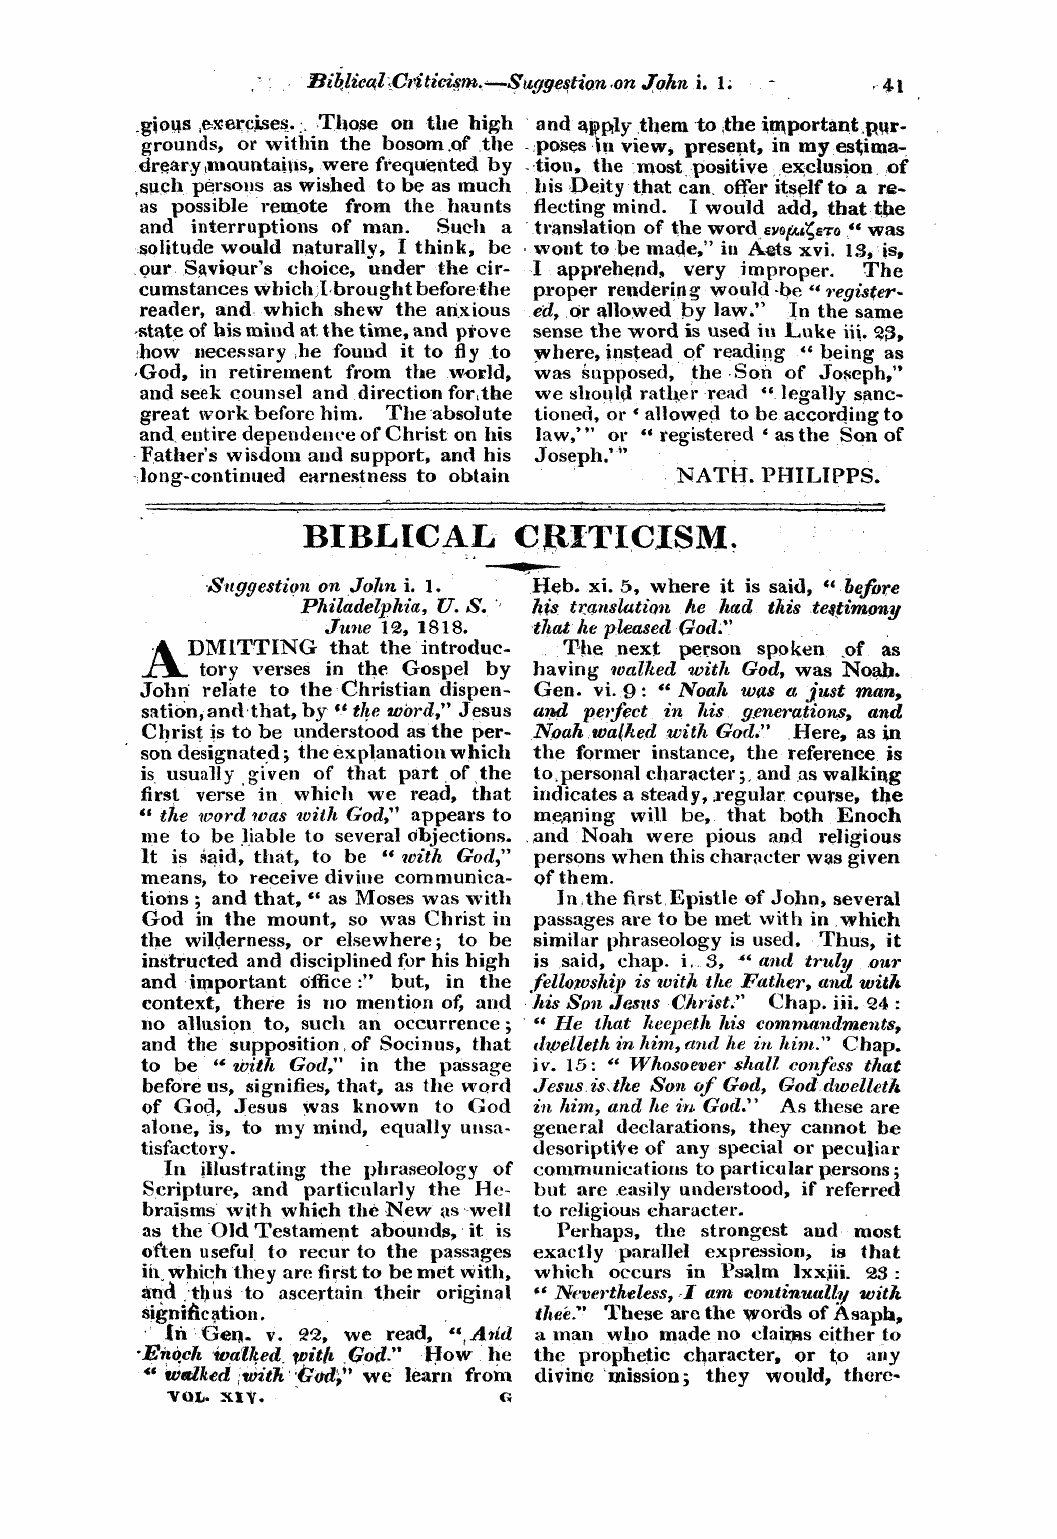 Monthly Repository (1806-1838) and Unitarian Chronicle (1832-1833): F Y, 1st edition - Biblical Criticism